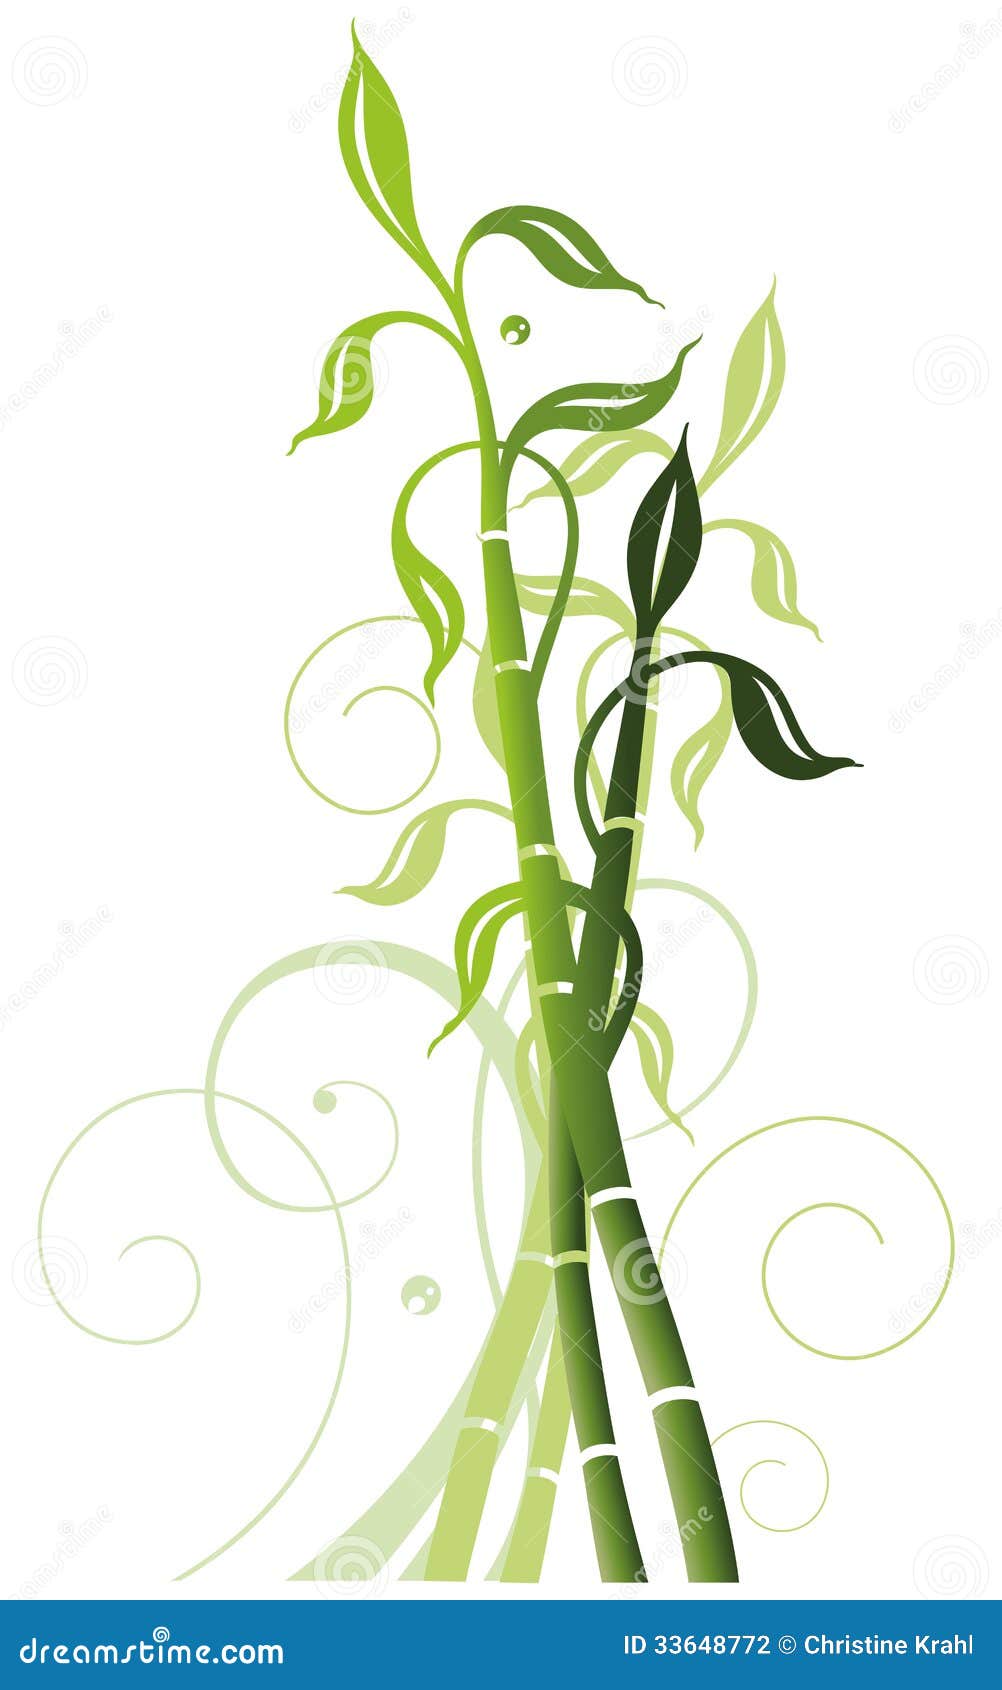 Bamboo, plant, border stock vector. Illustration of nature